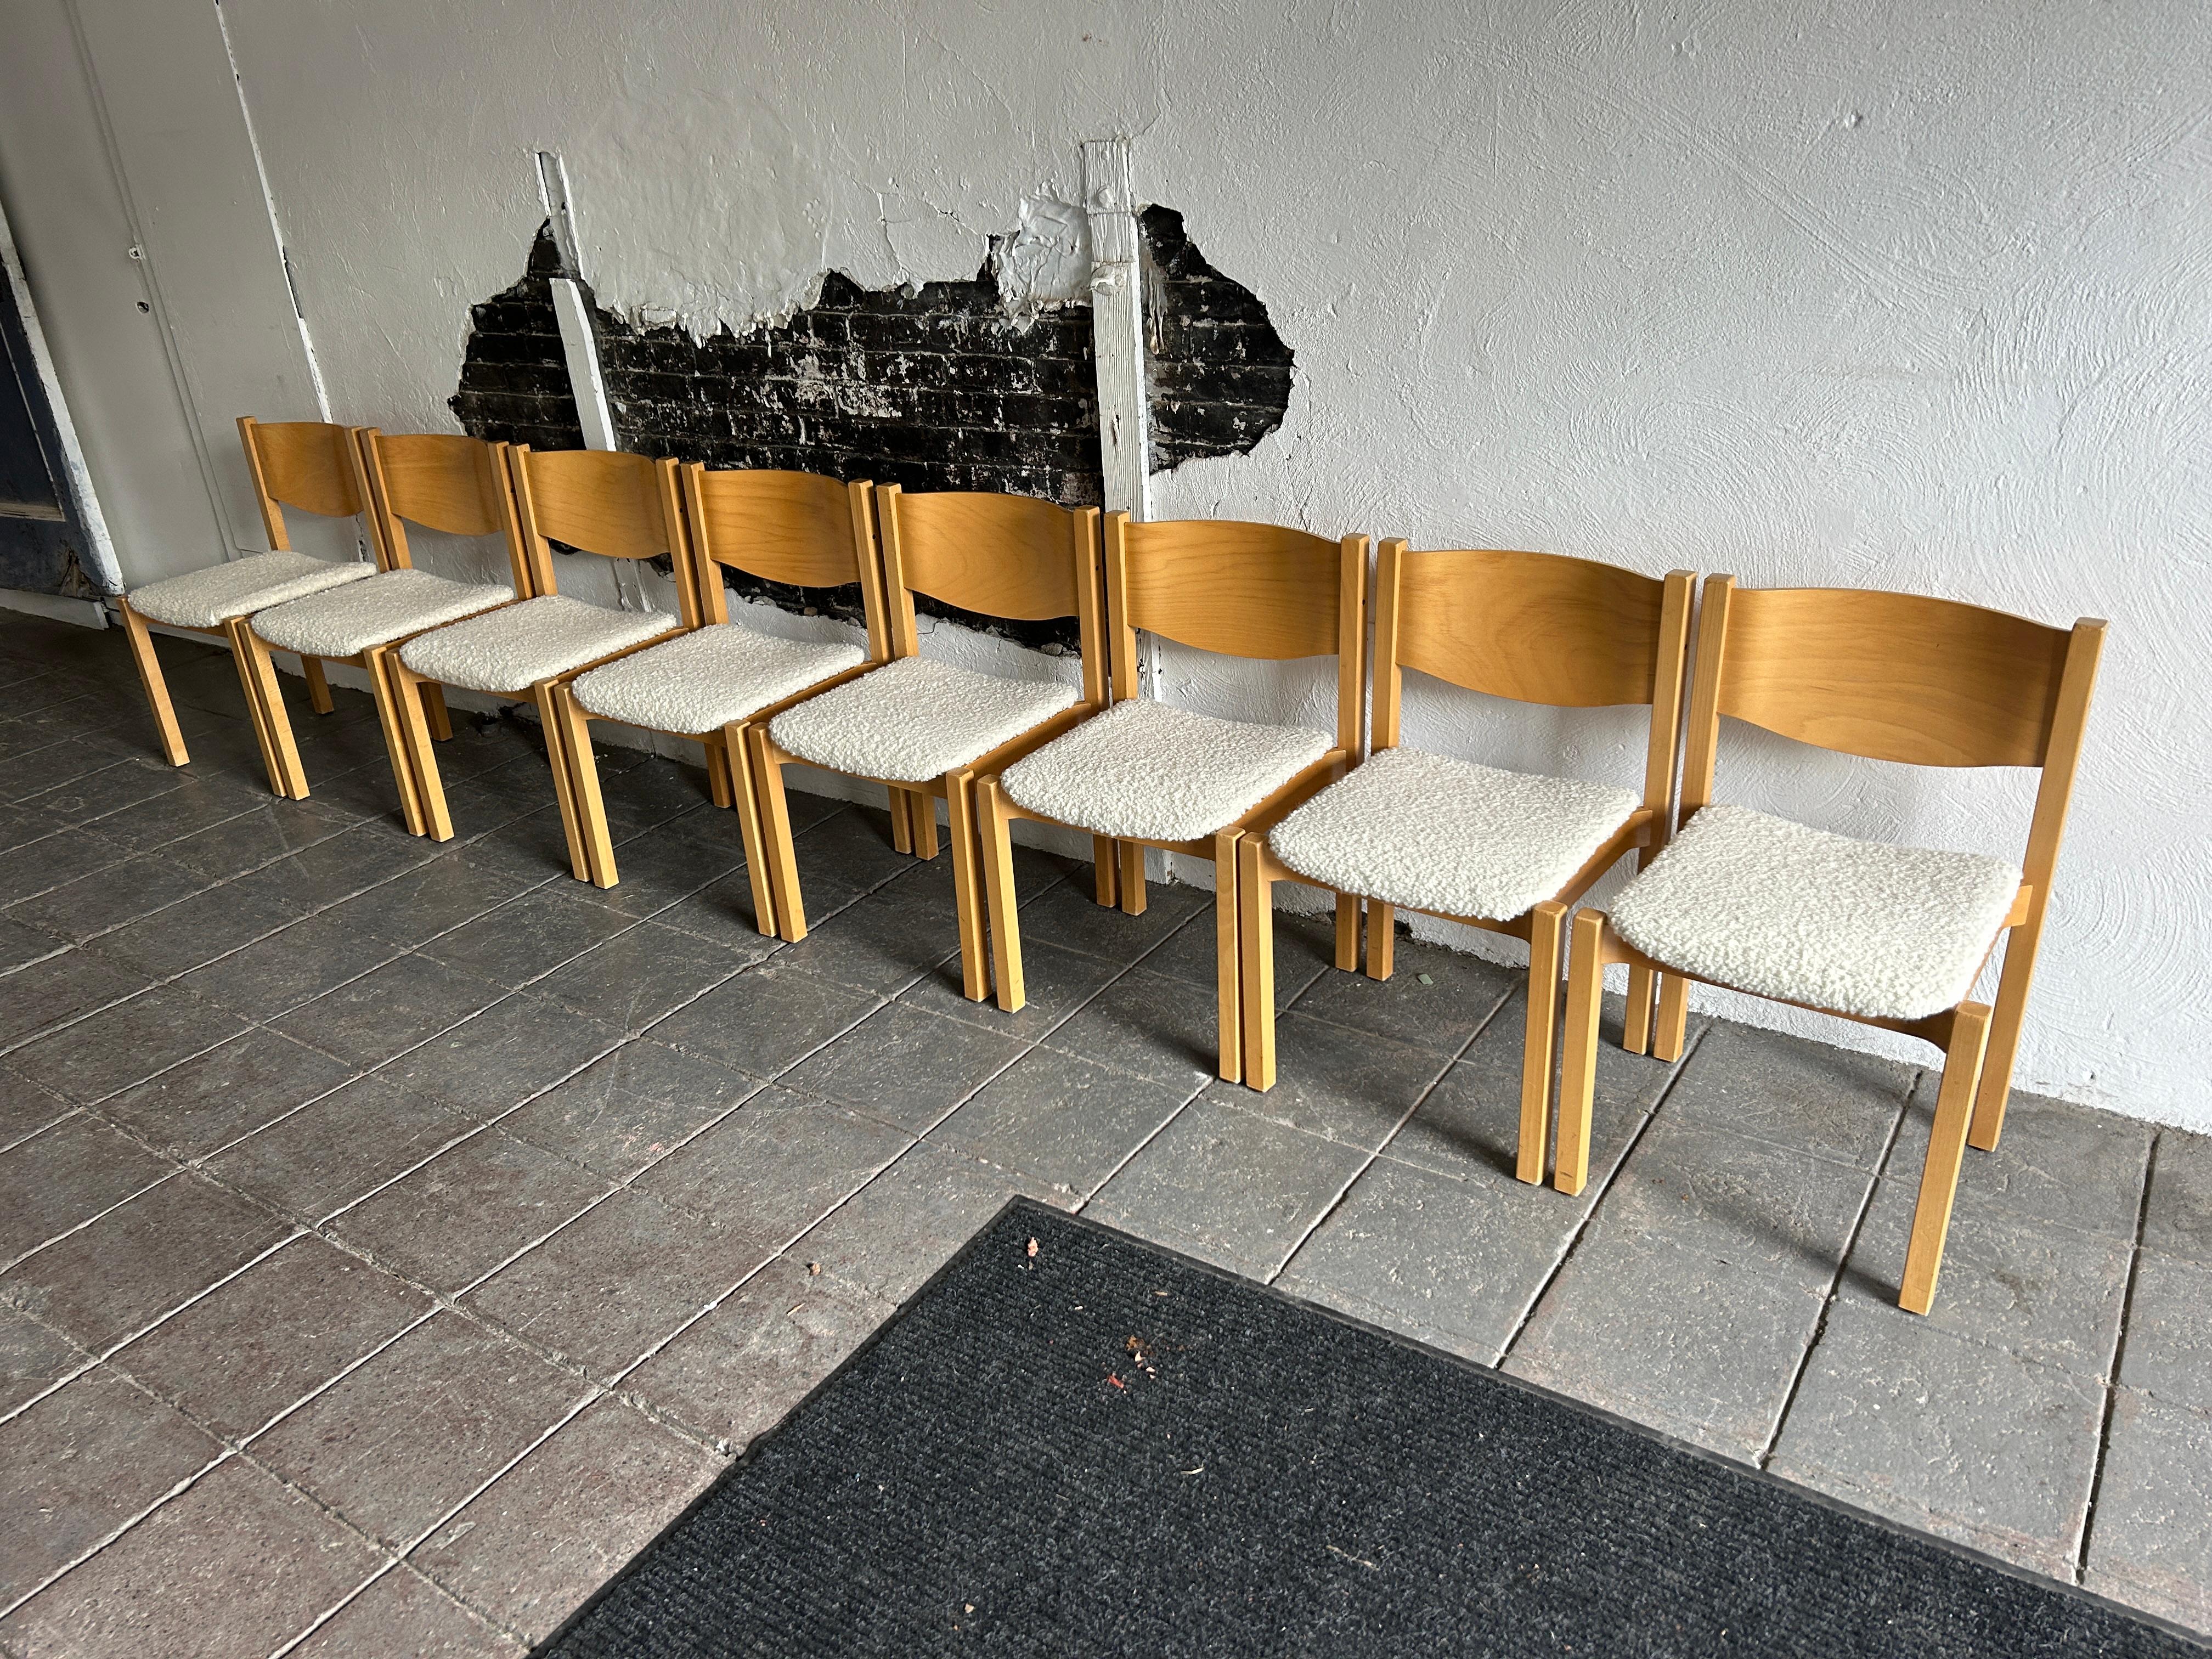 Set of 8 Scandinavian modern birch dining chairs in boucle Upholstery.

Sold as a set of 8 chairs 